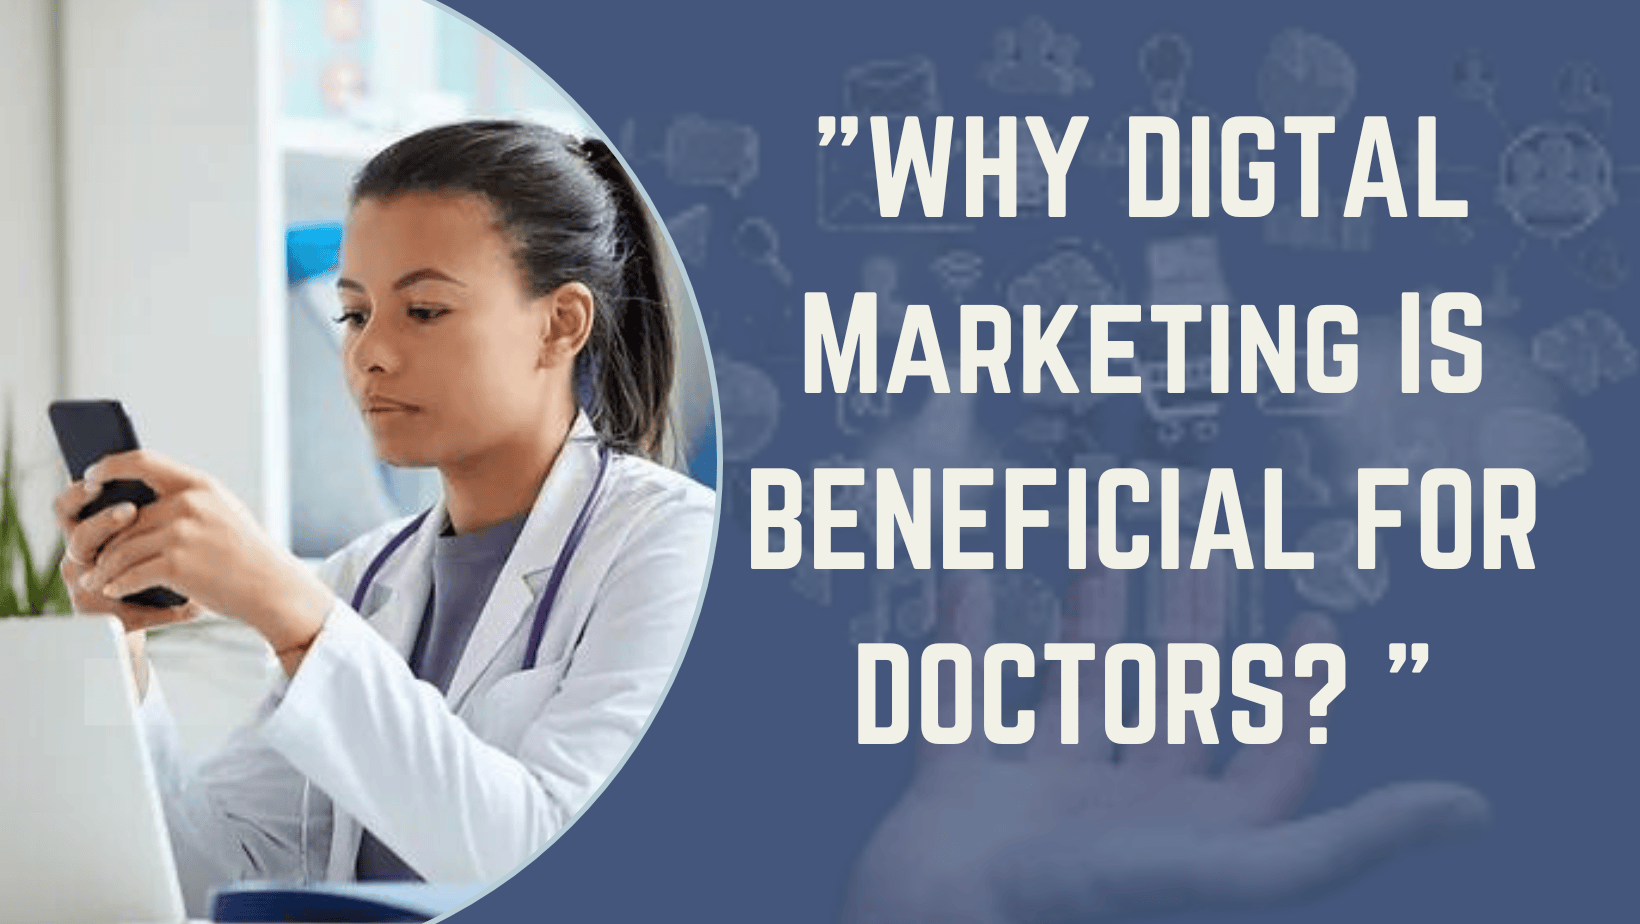 Is the digital marketing beneficial for doctors